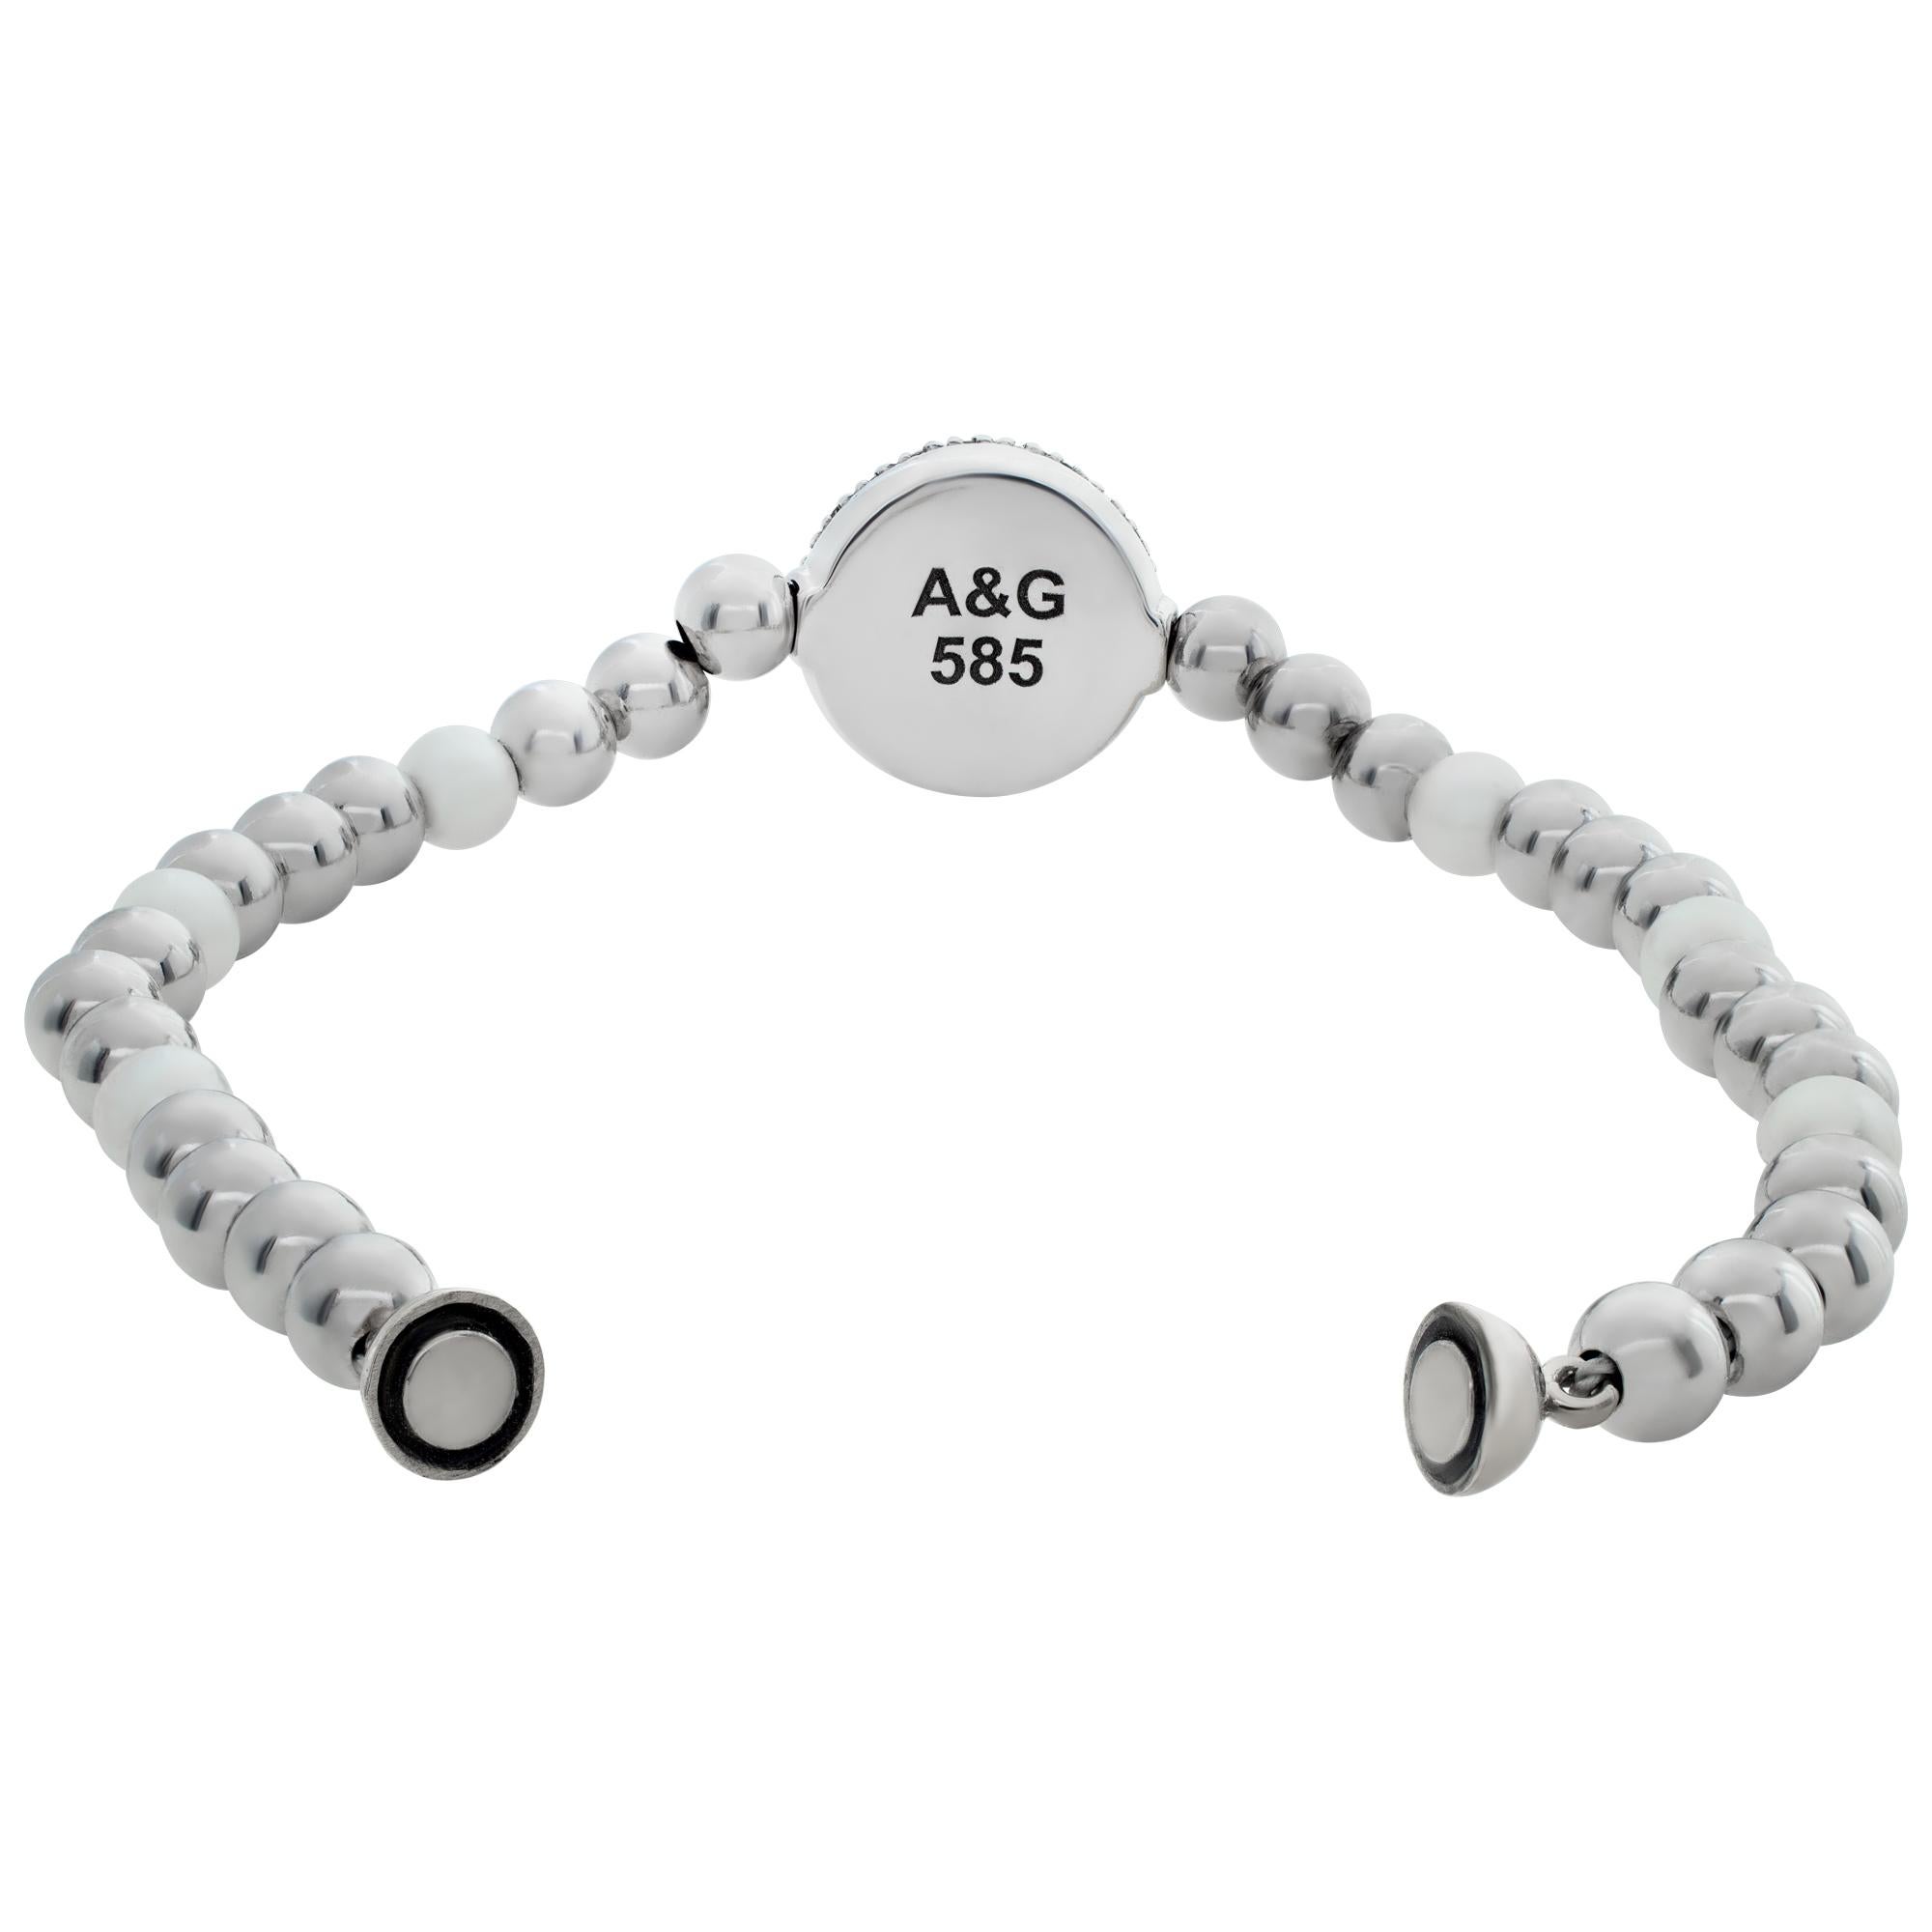 A&G signed beads and pave diamonds buttons bracelet in 14k white gold In Excellent Condition For Sale In Surfside, FL